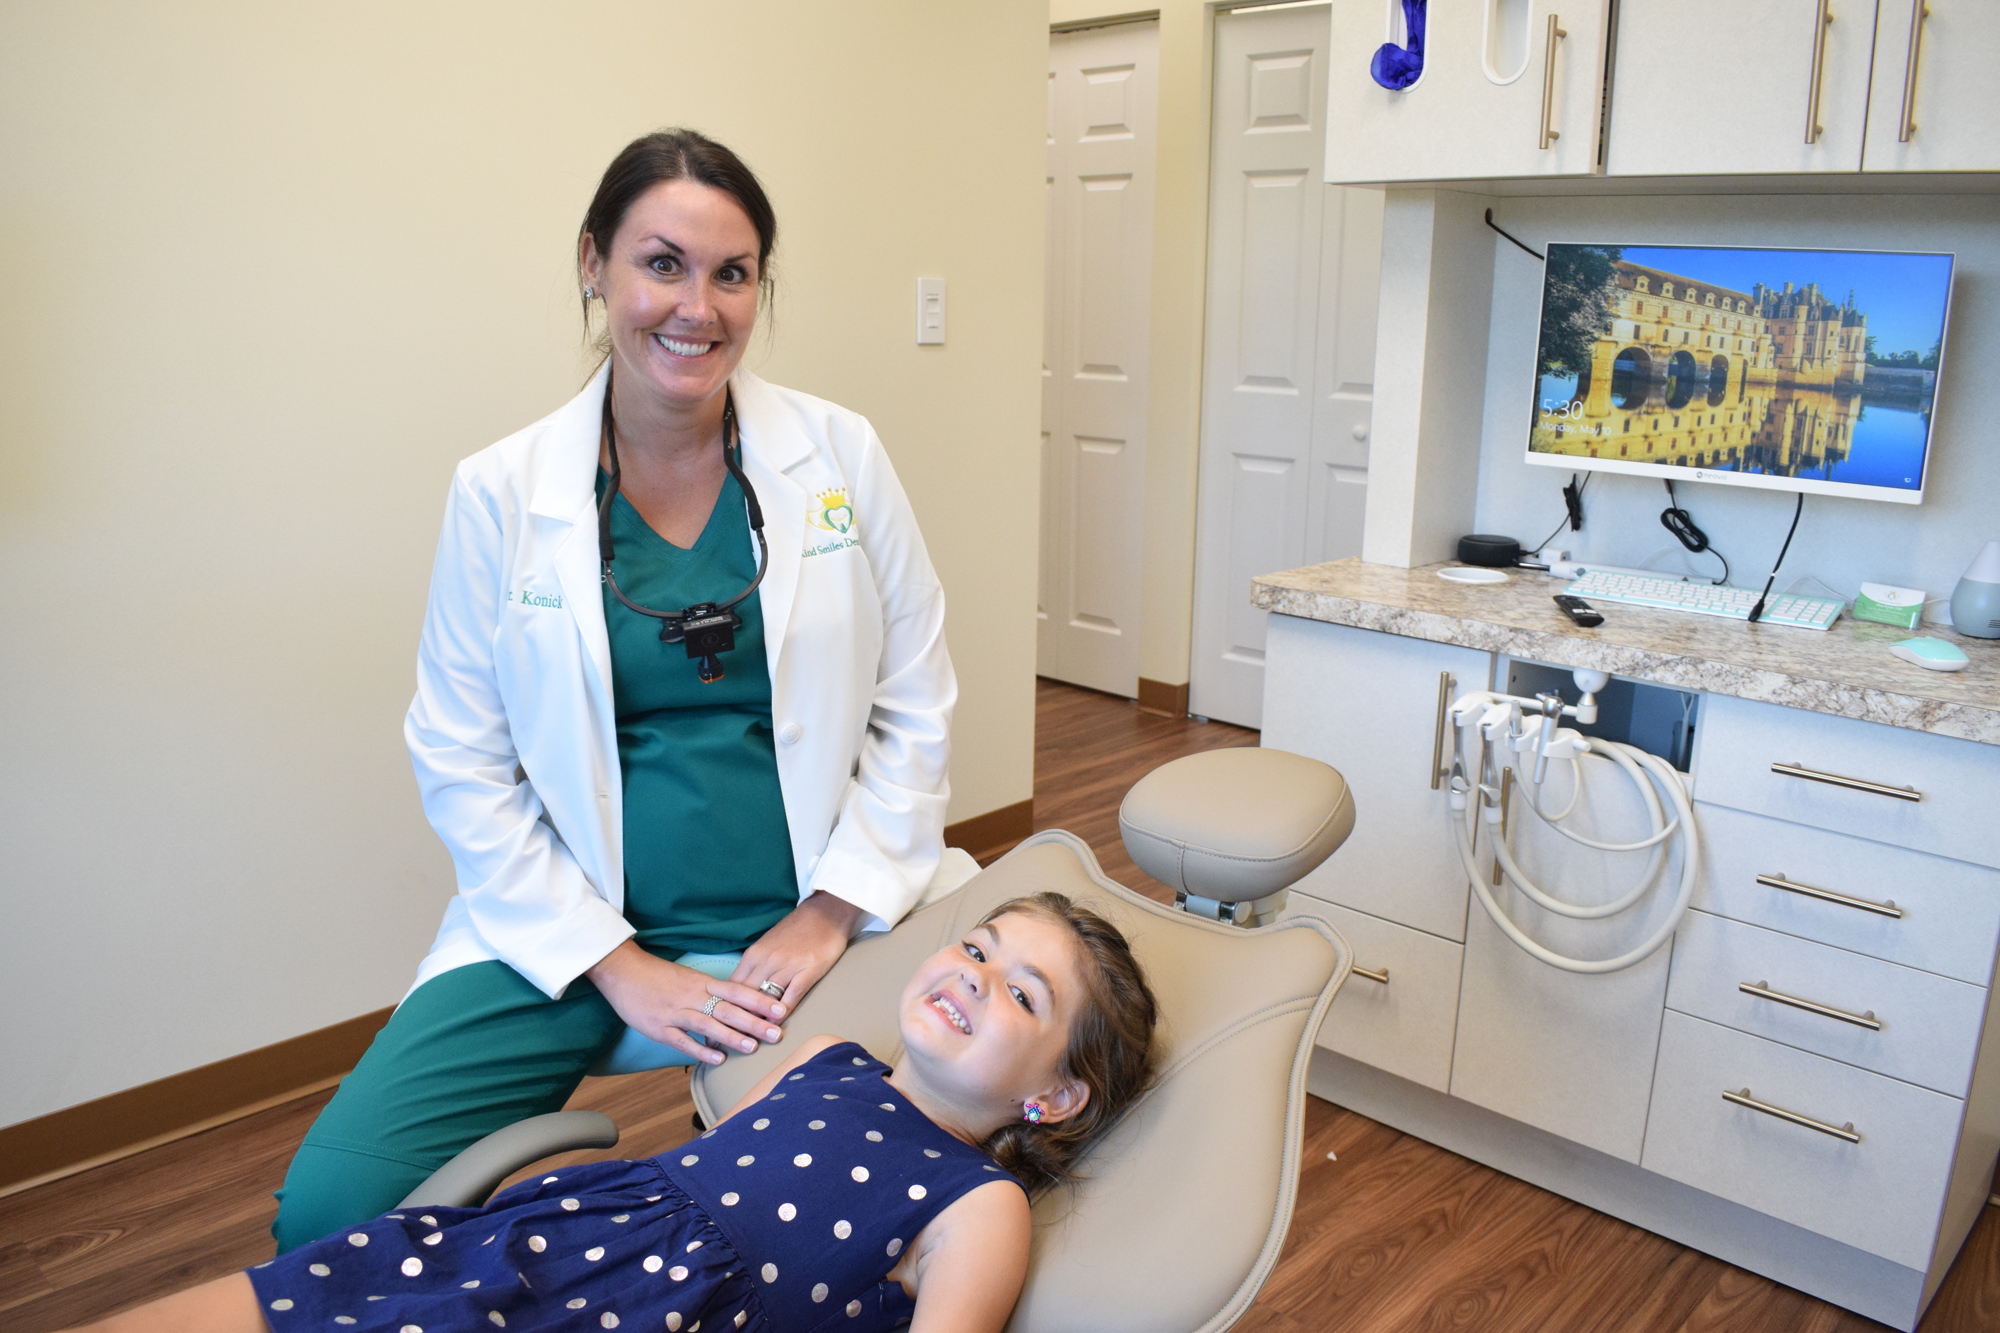 Greenbrook's Allison Konick wants to treat each of her patients like family. She says she wouldn't provide a treatment to anyone that she wouldn't provide to her own family like her 5-year-old daughter Kenna McSherry.